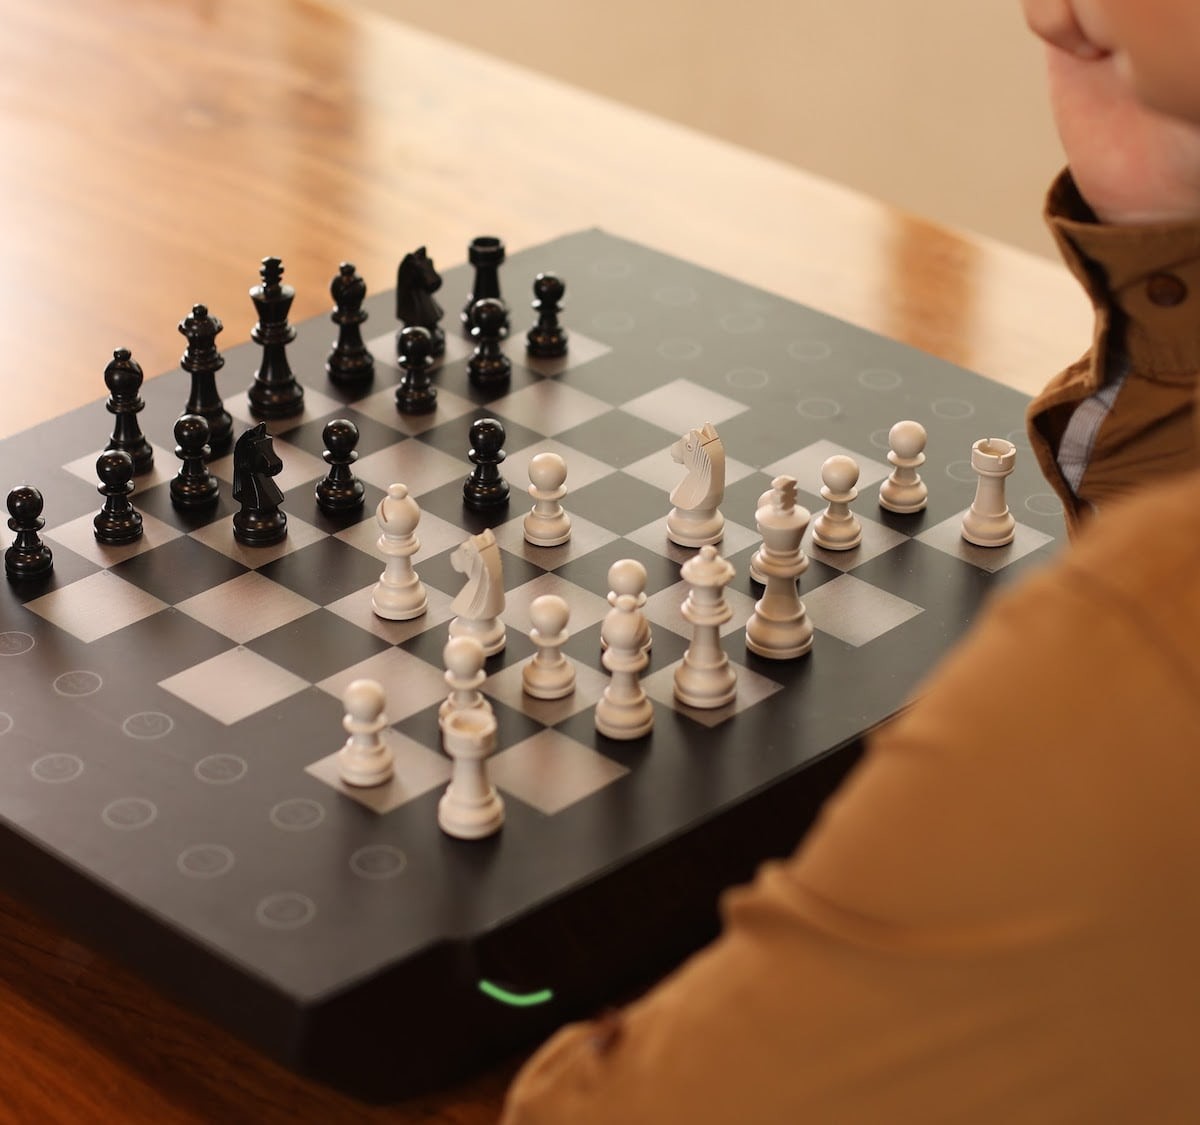 Square Off Swap Magical Chessboard has a built-in coaching feature